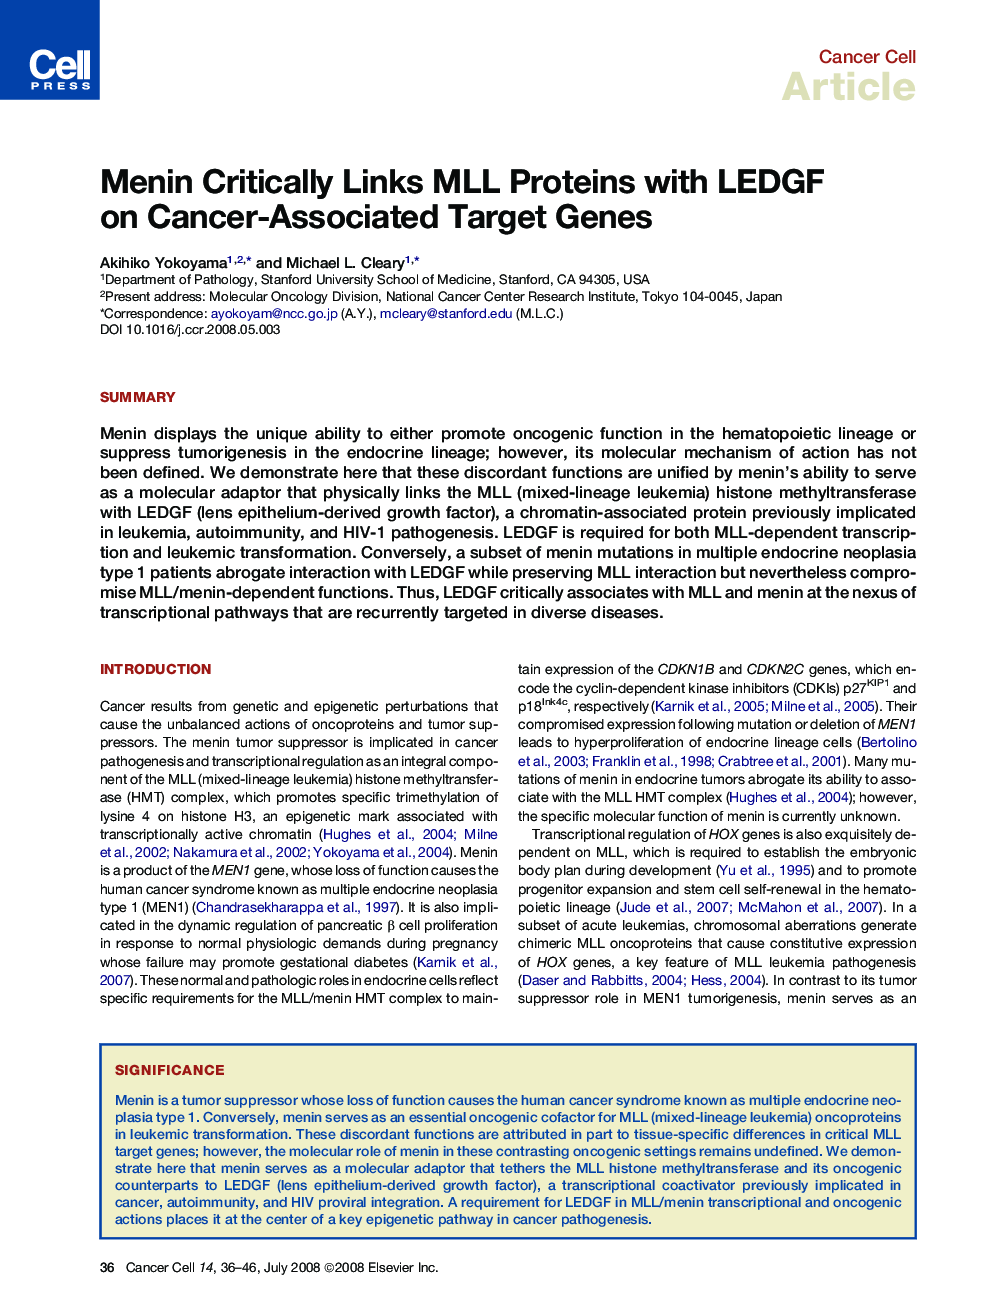 Menin Critically Links MLL Proteins with LEDGF on Cancer-Associated Target Genes